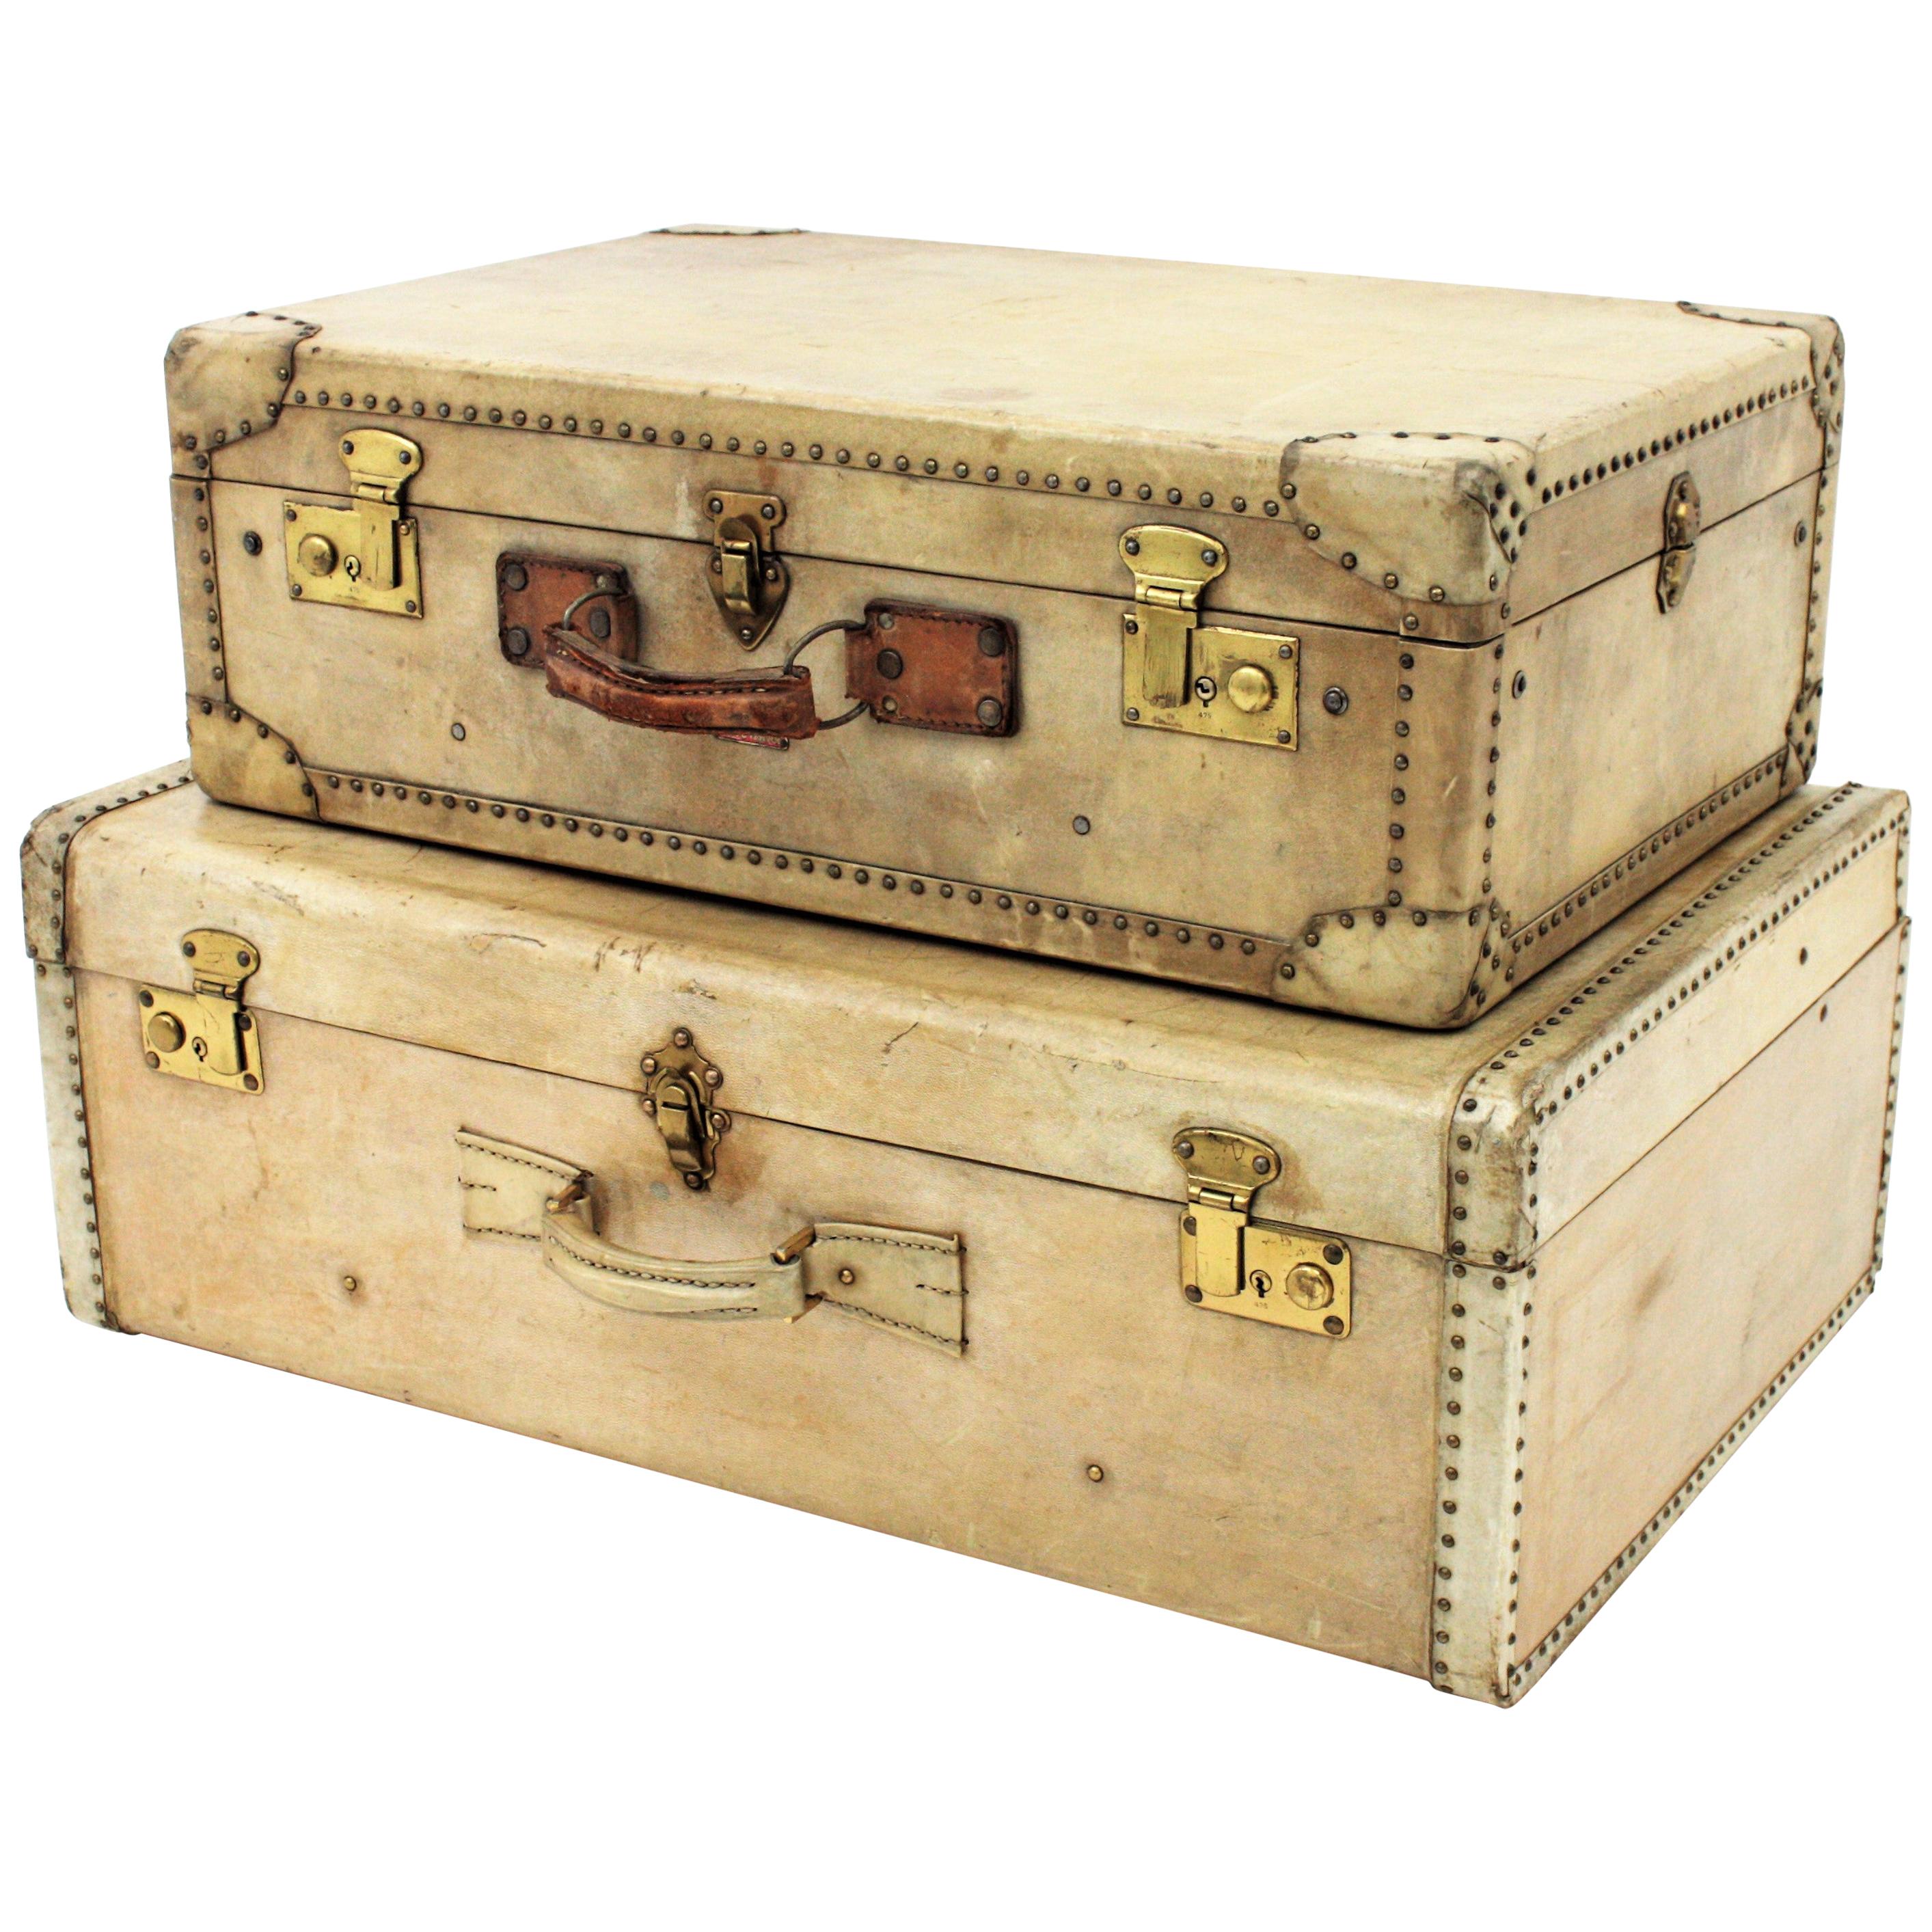 A set of high quality French luxury vellum suitcases. France, 1920-1930s.
Made in wood and parchment with brass studs and lock plates in brass and leather handles.
The one on the top was manufactured by Innovation.
The one on the bottom comes from